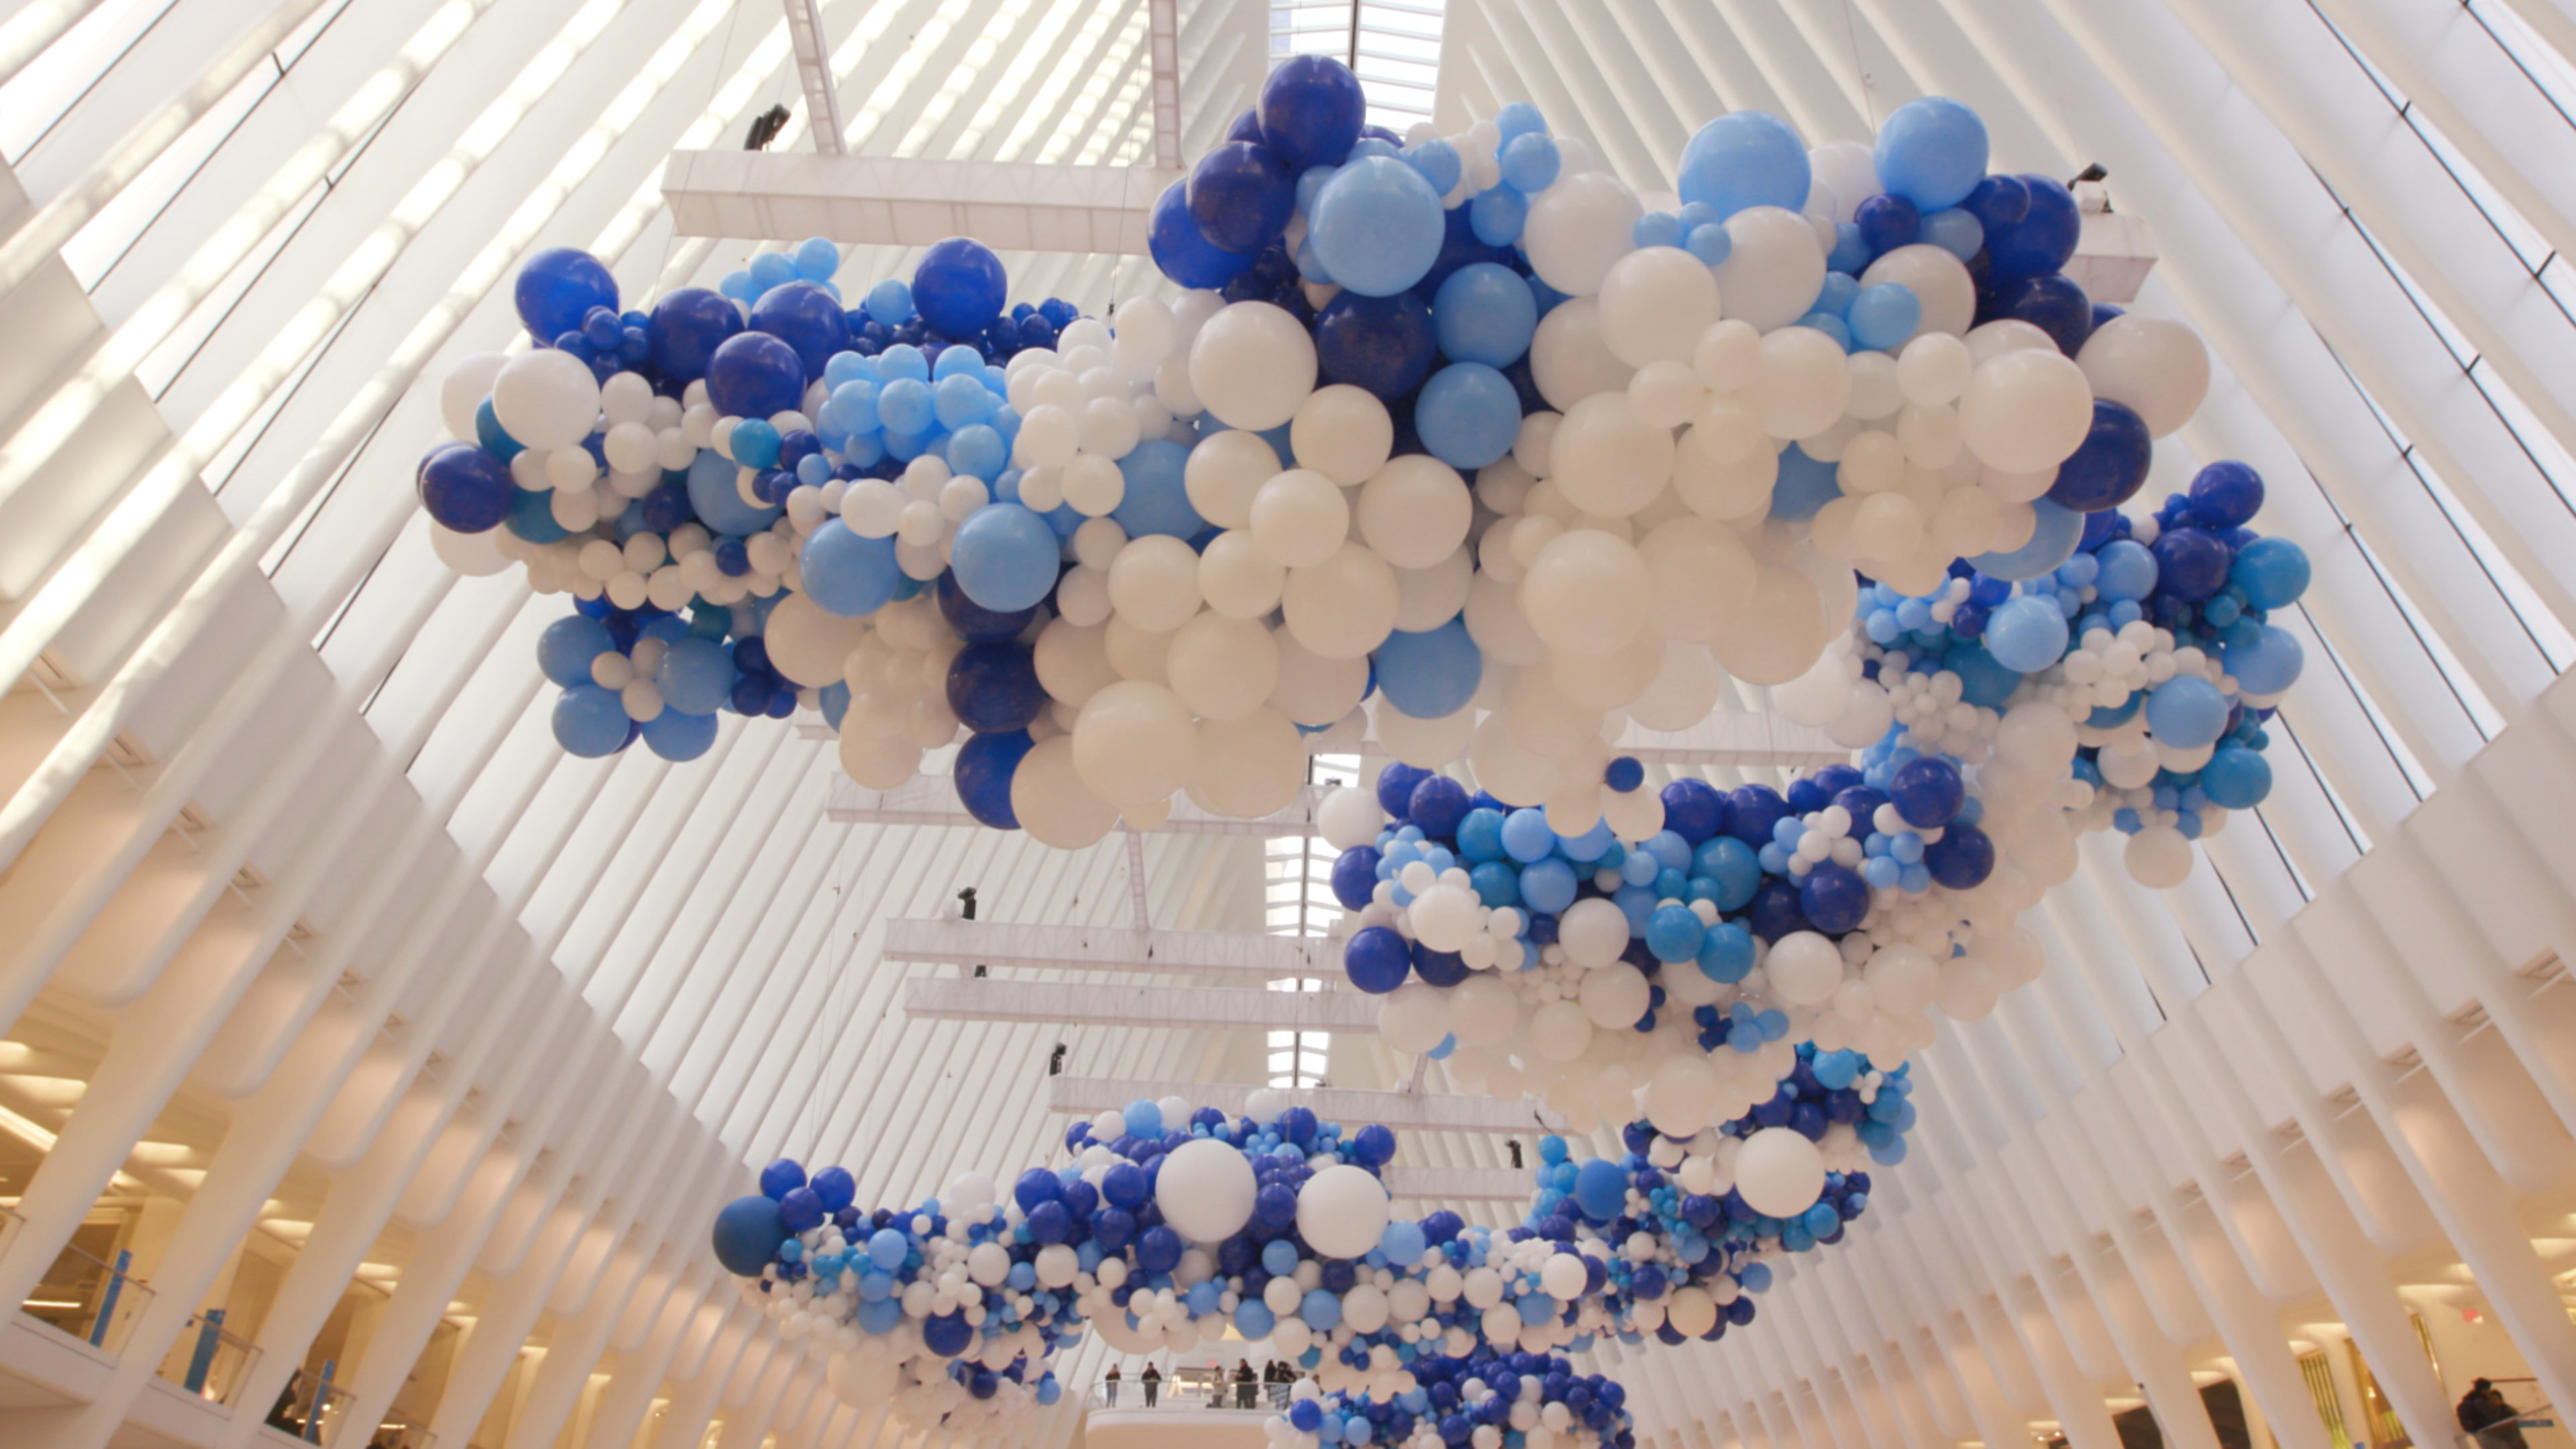 How Matt Damon—And A Bunch Of Balloons—Are Raising Awareness For World Water Day